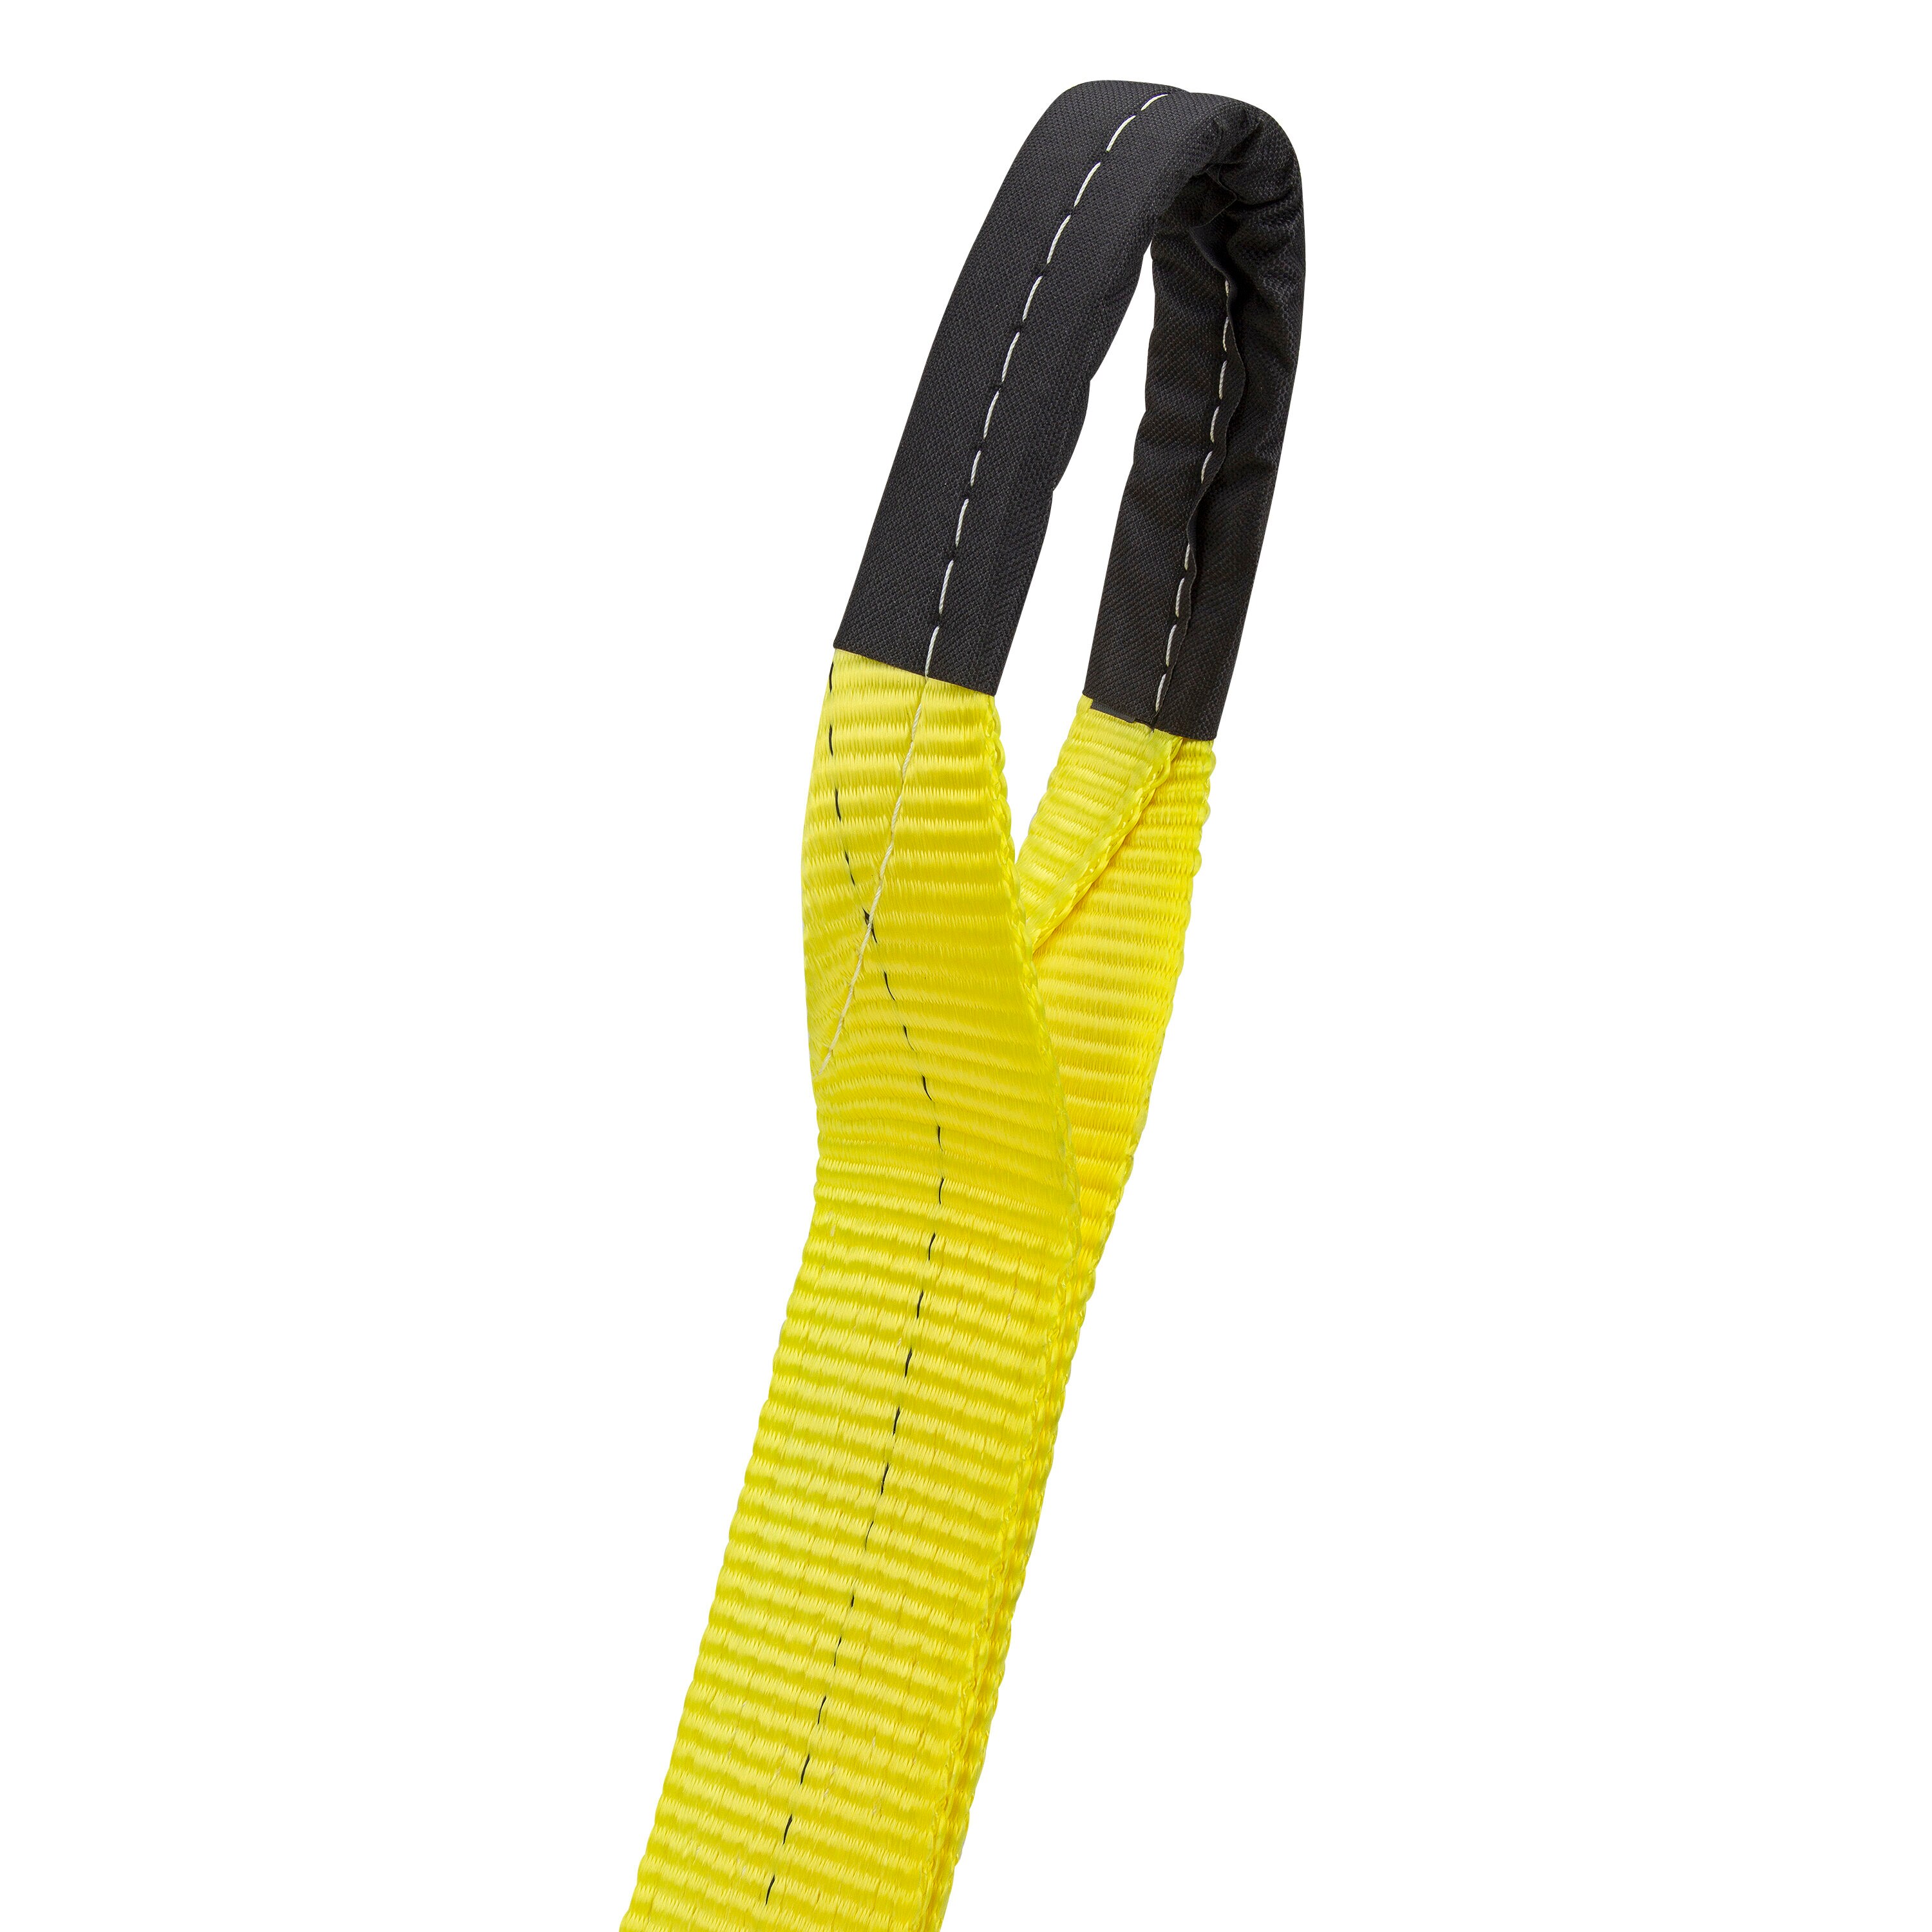 Stanley Tow Strap